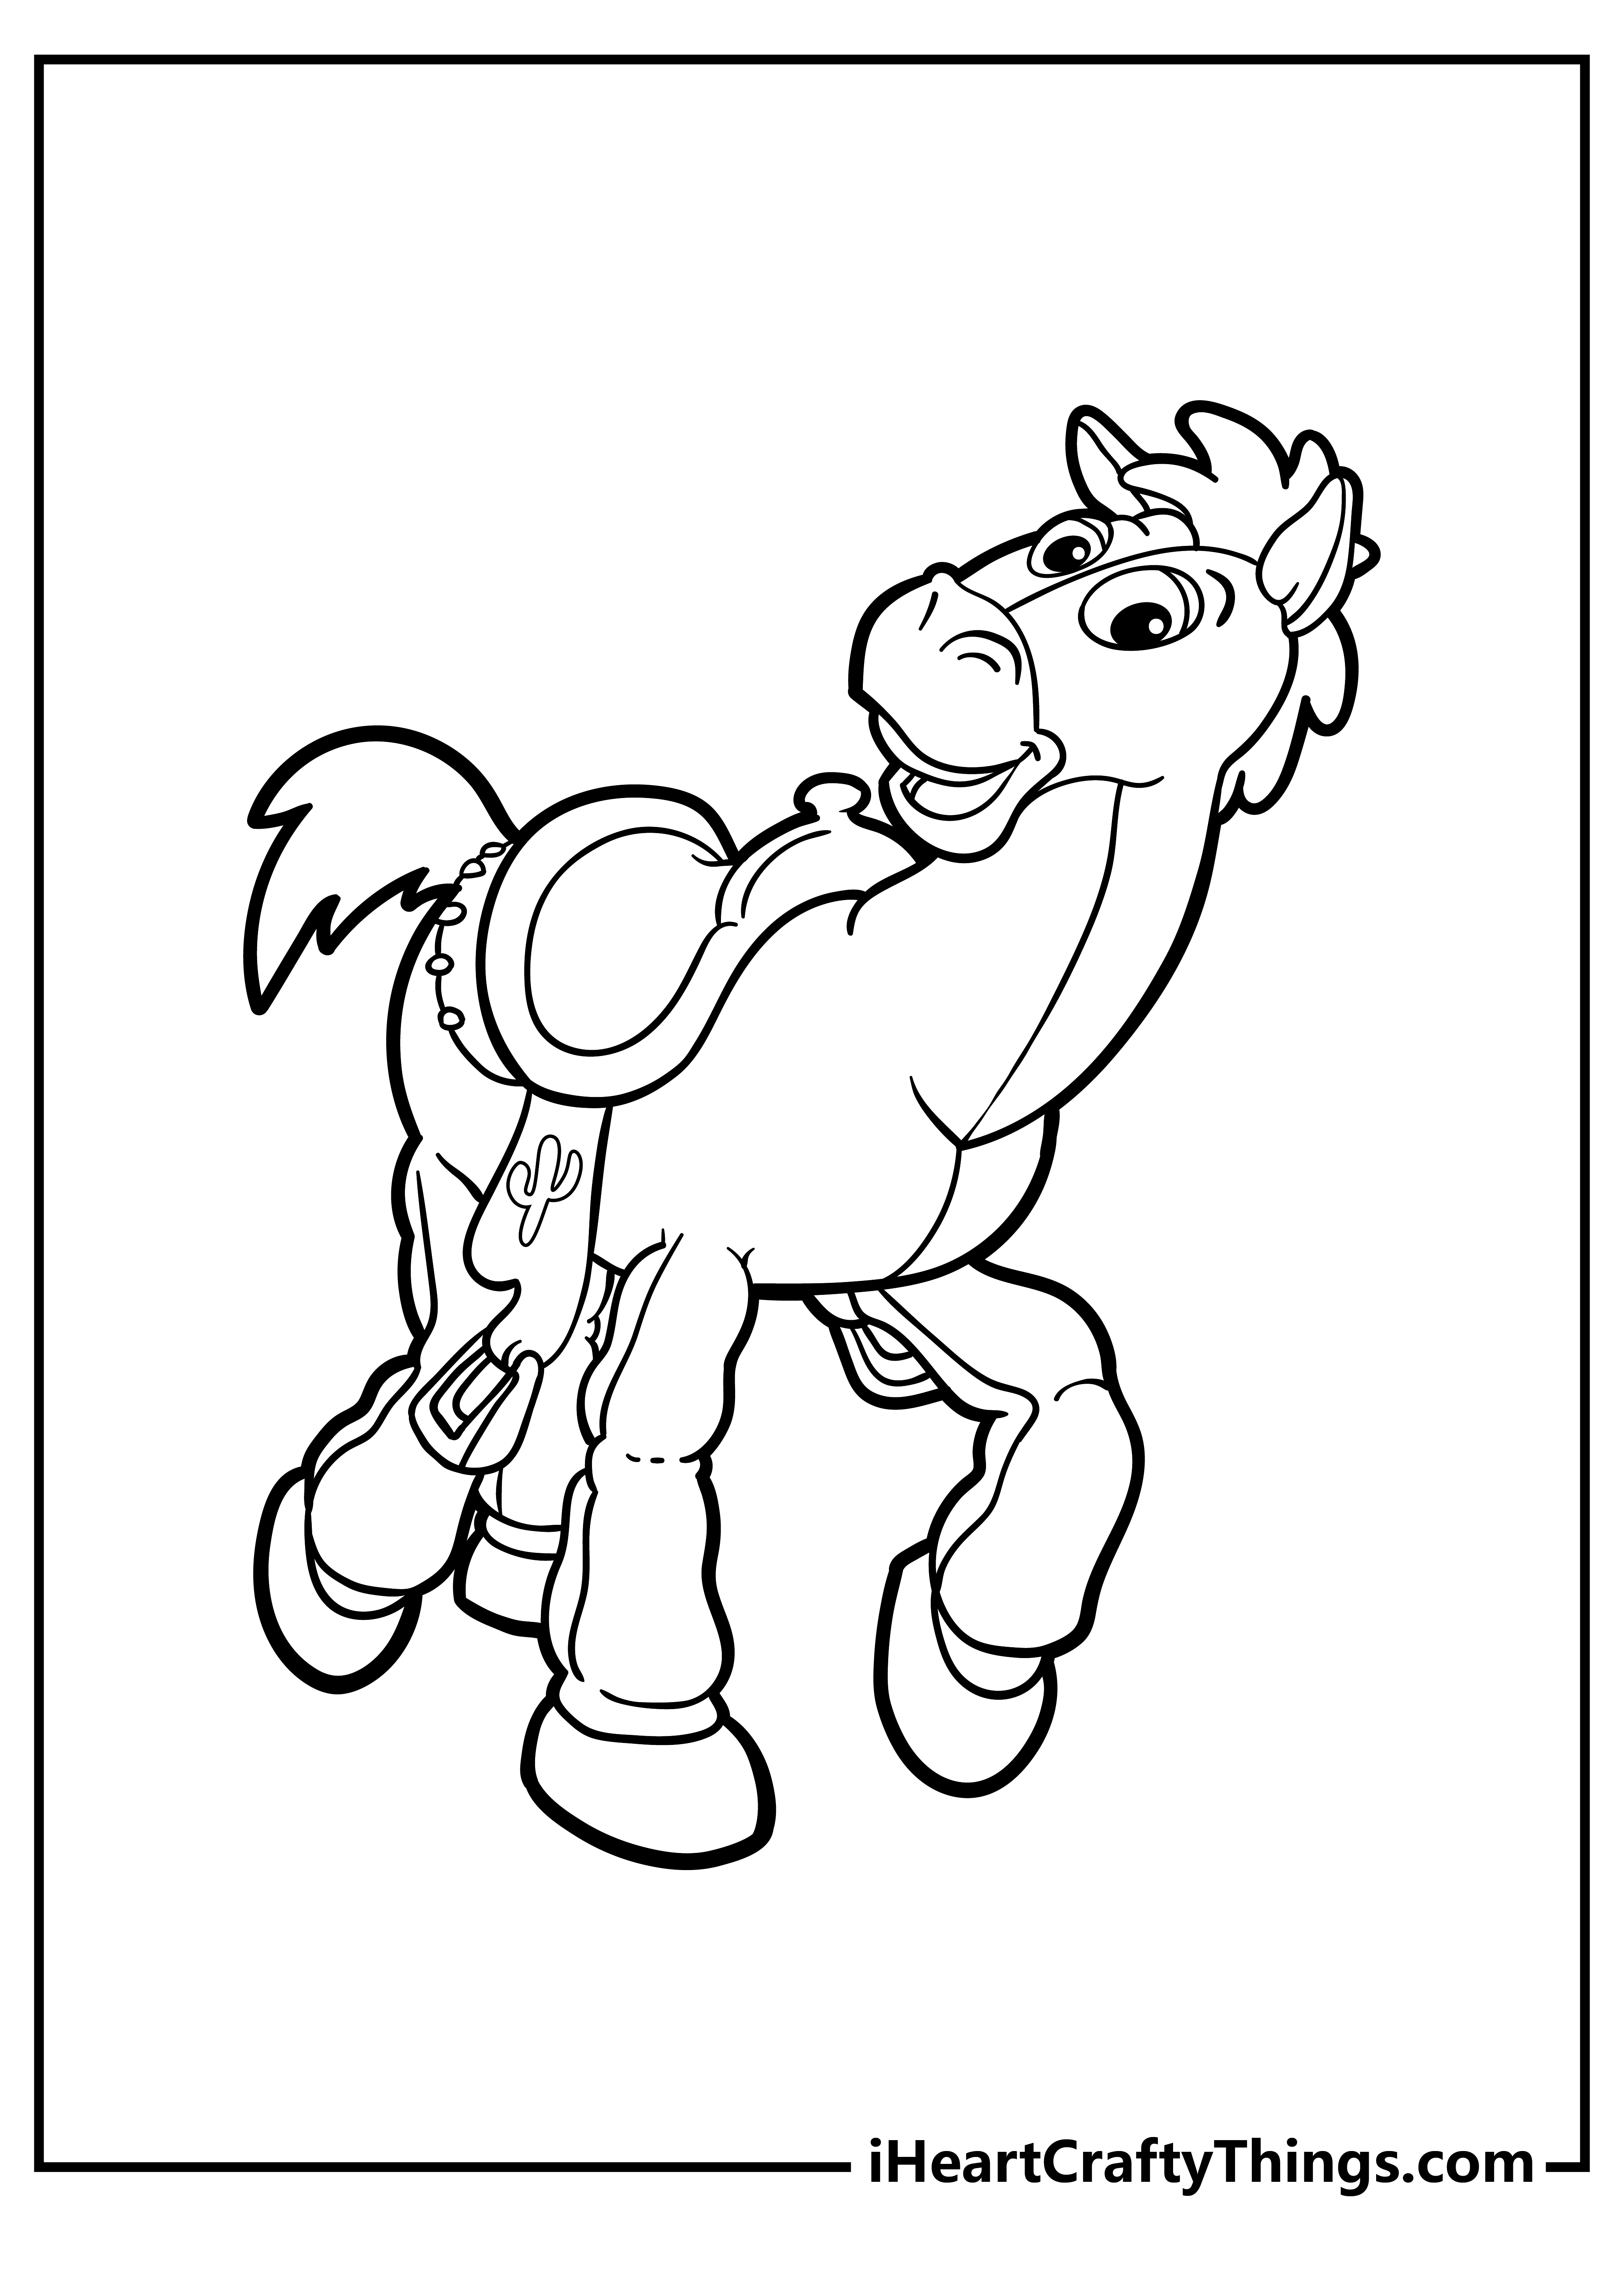 Toy Story Coloring Book for adults free download